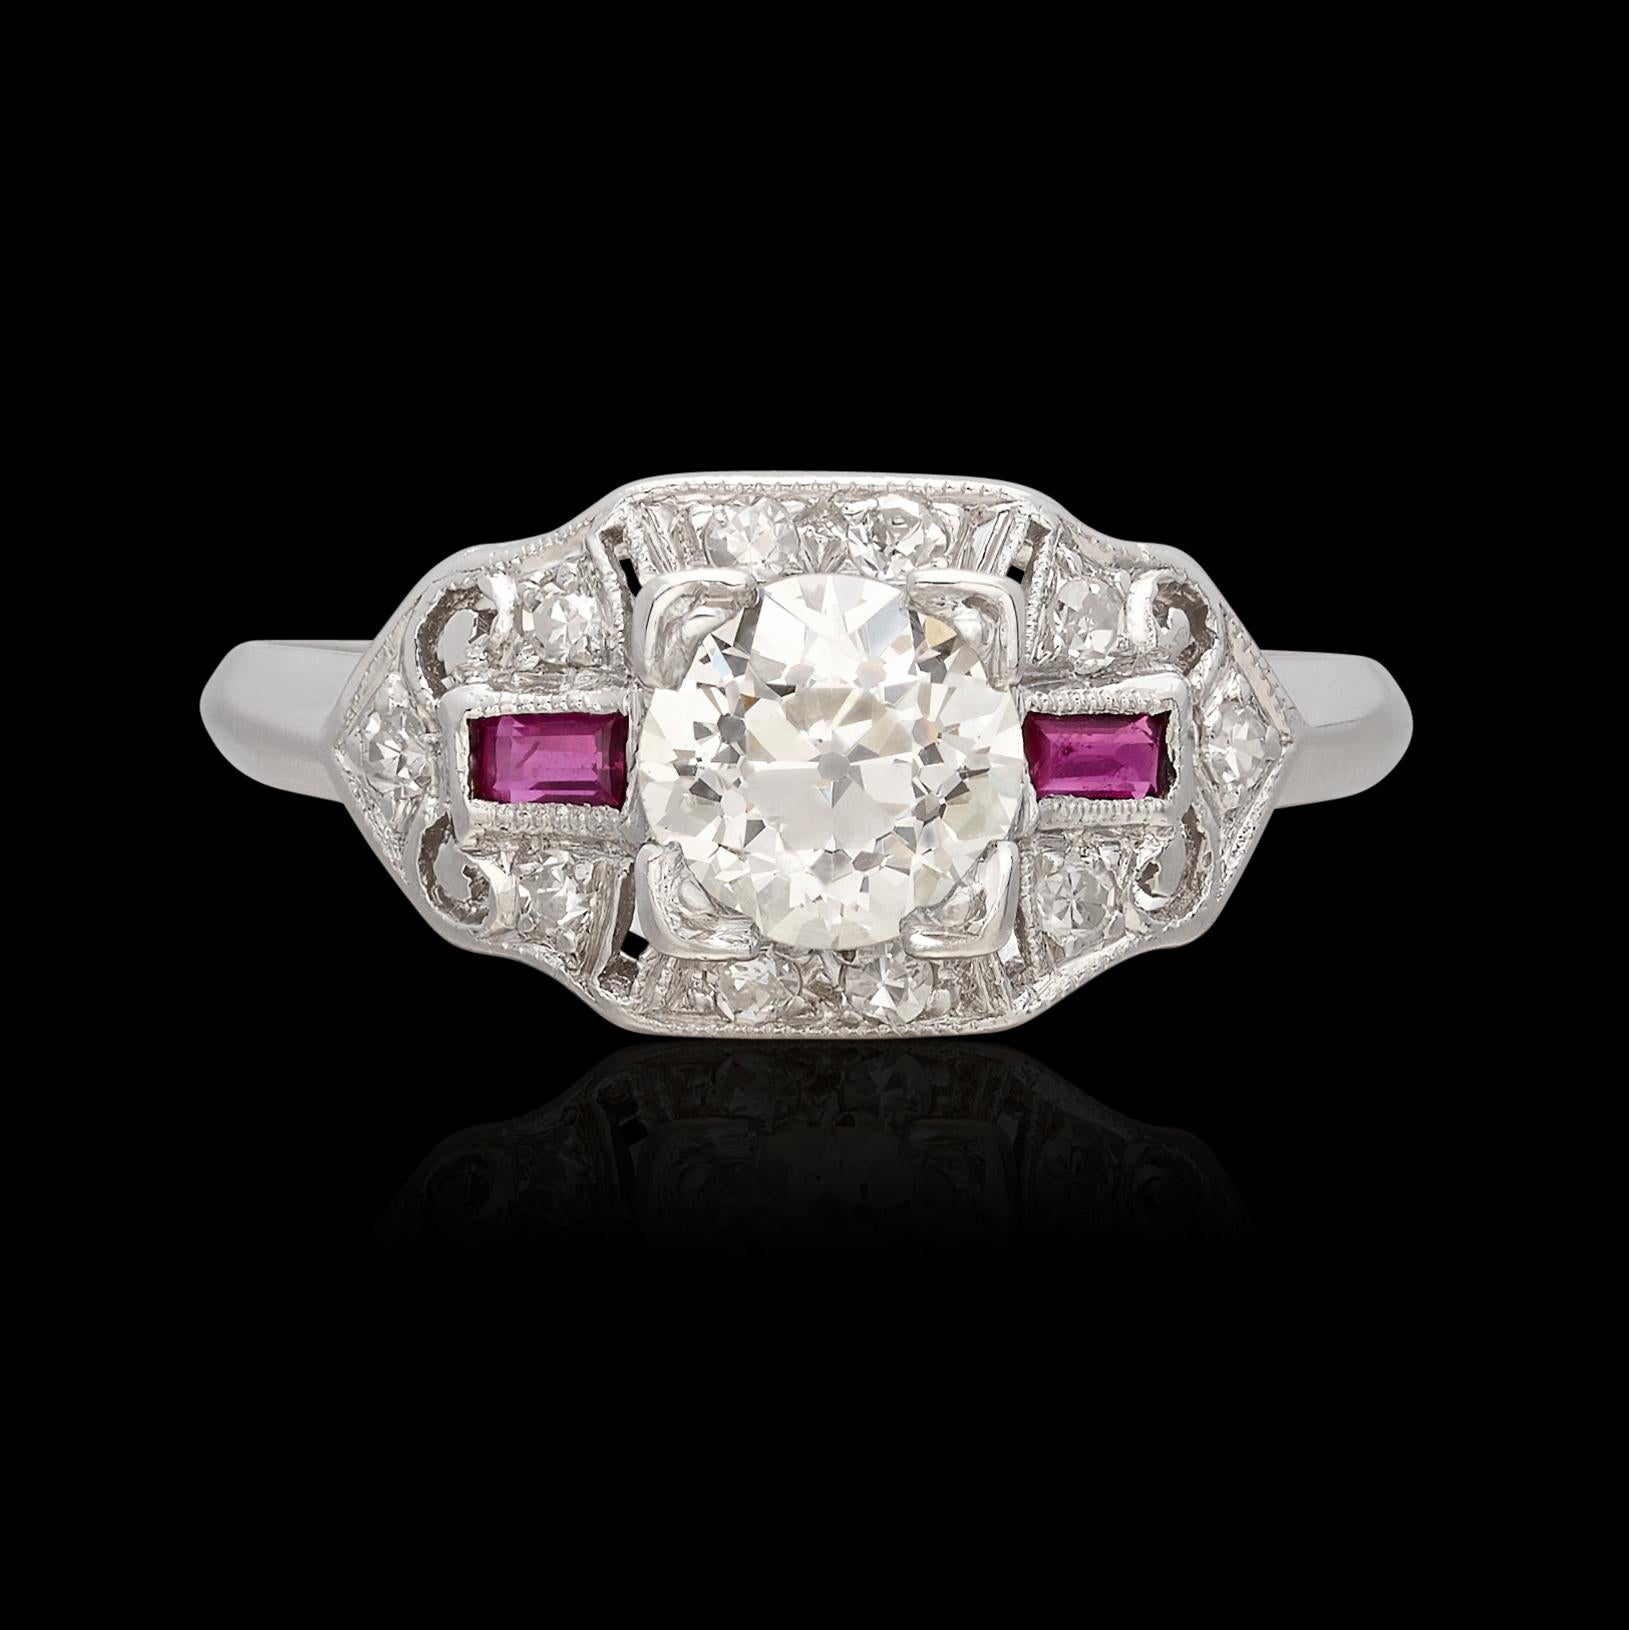 Looking for a pop of color in your antique diamond engagement ring? Look no further! This platinum beauty features a 0.65 carat Old European Cut Diamond (+- K/VS) set with four prongs amidst .10 carats of fine melee diamonds and baguette rubies on